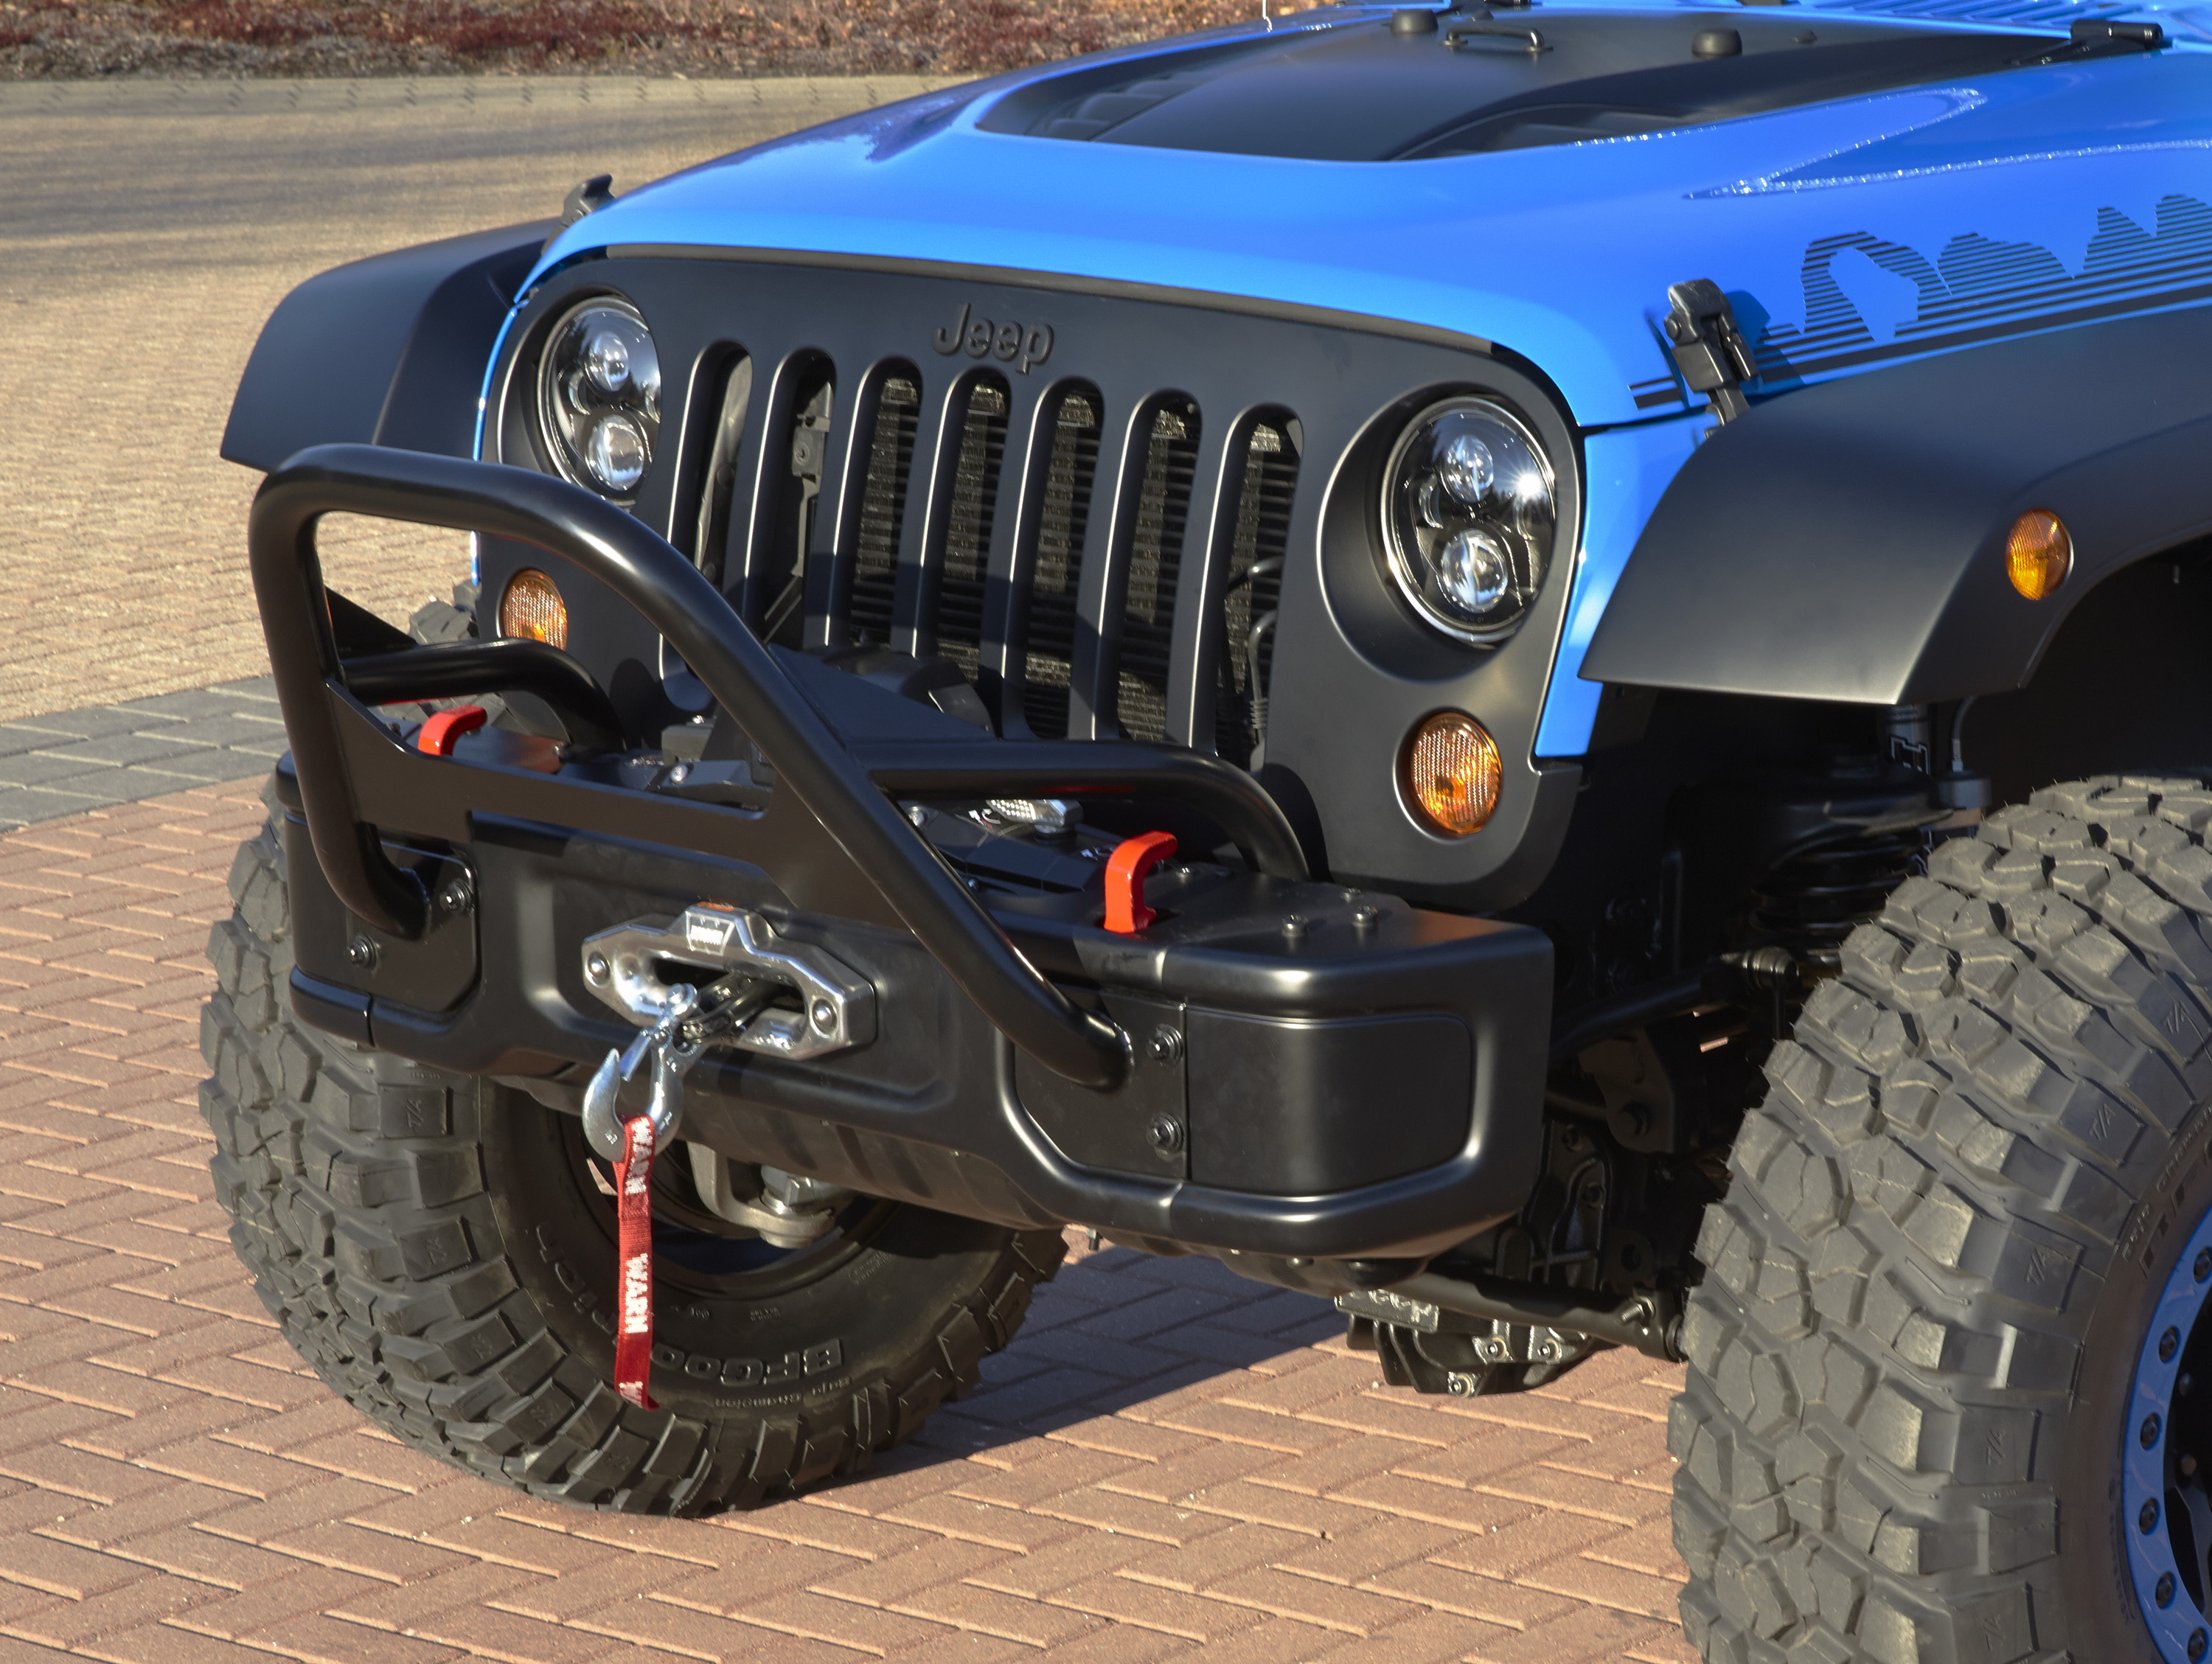 Jeep Wrangler Maximum Performance is one of six concept vehicles